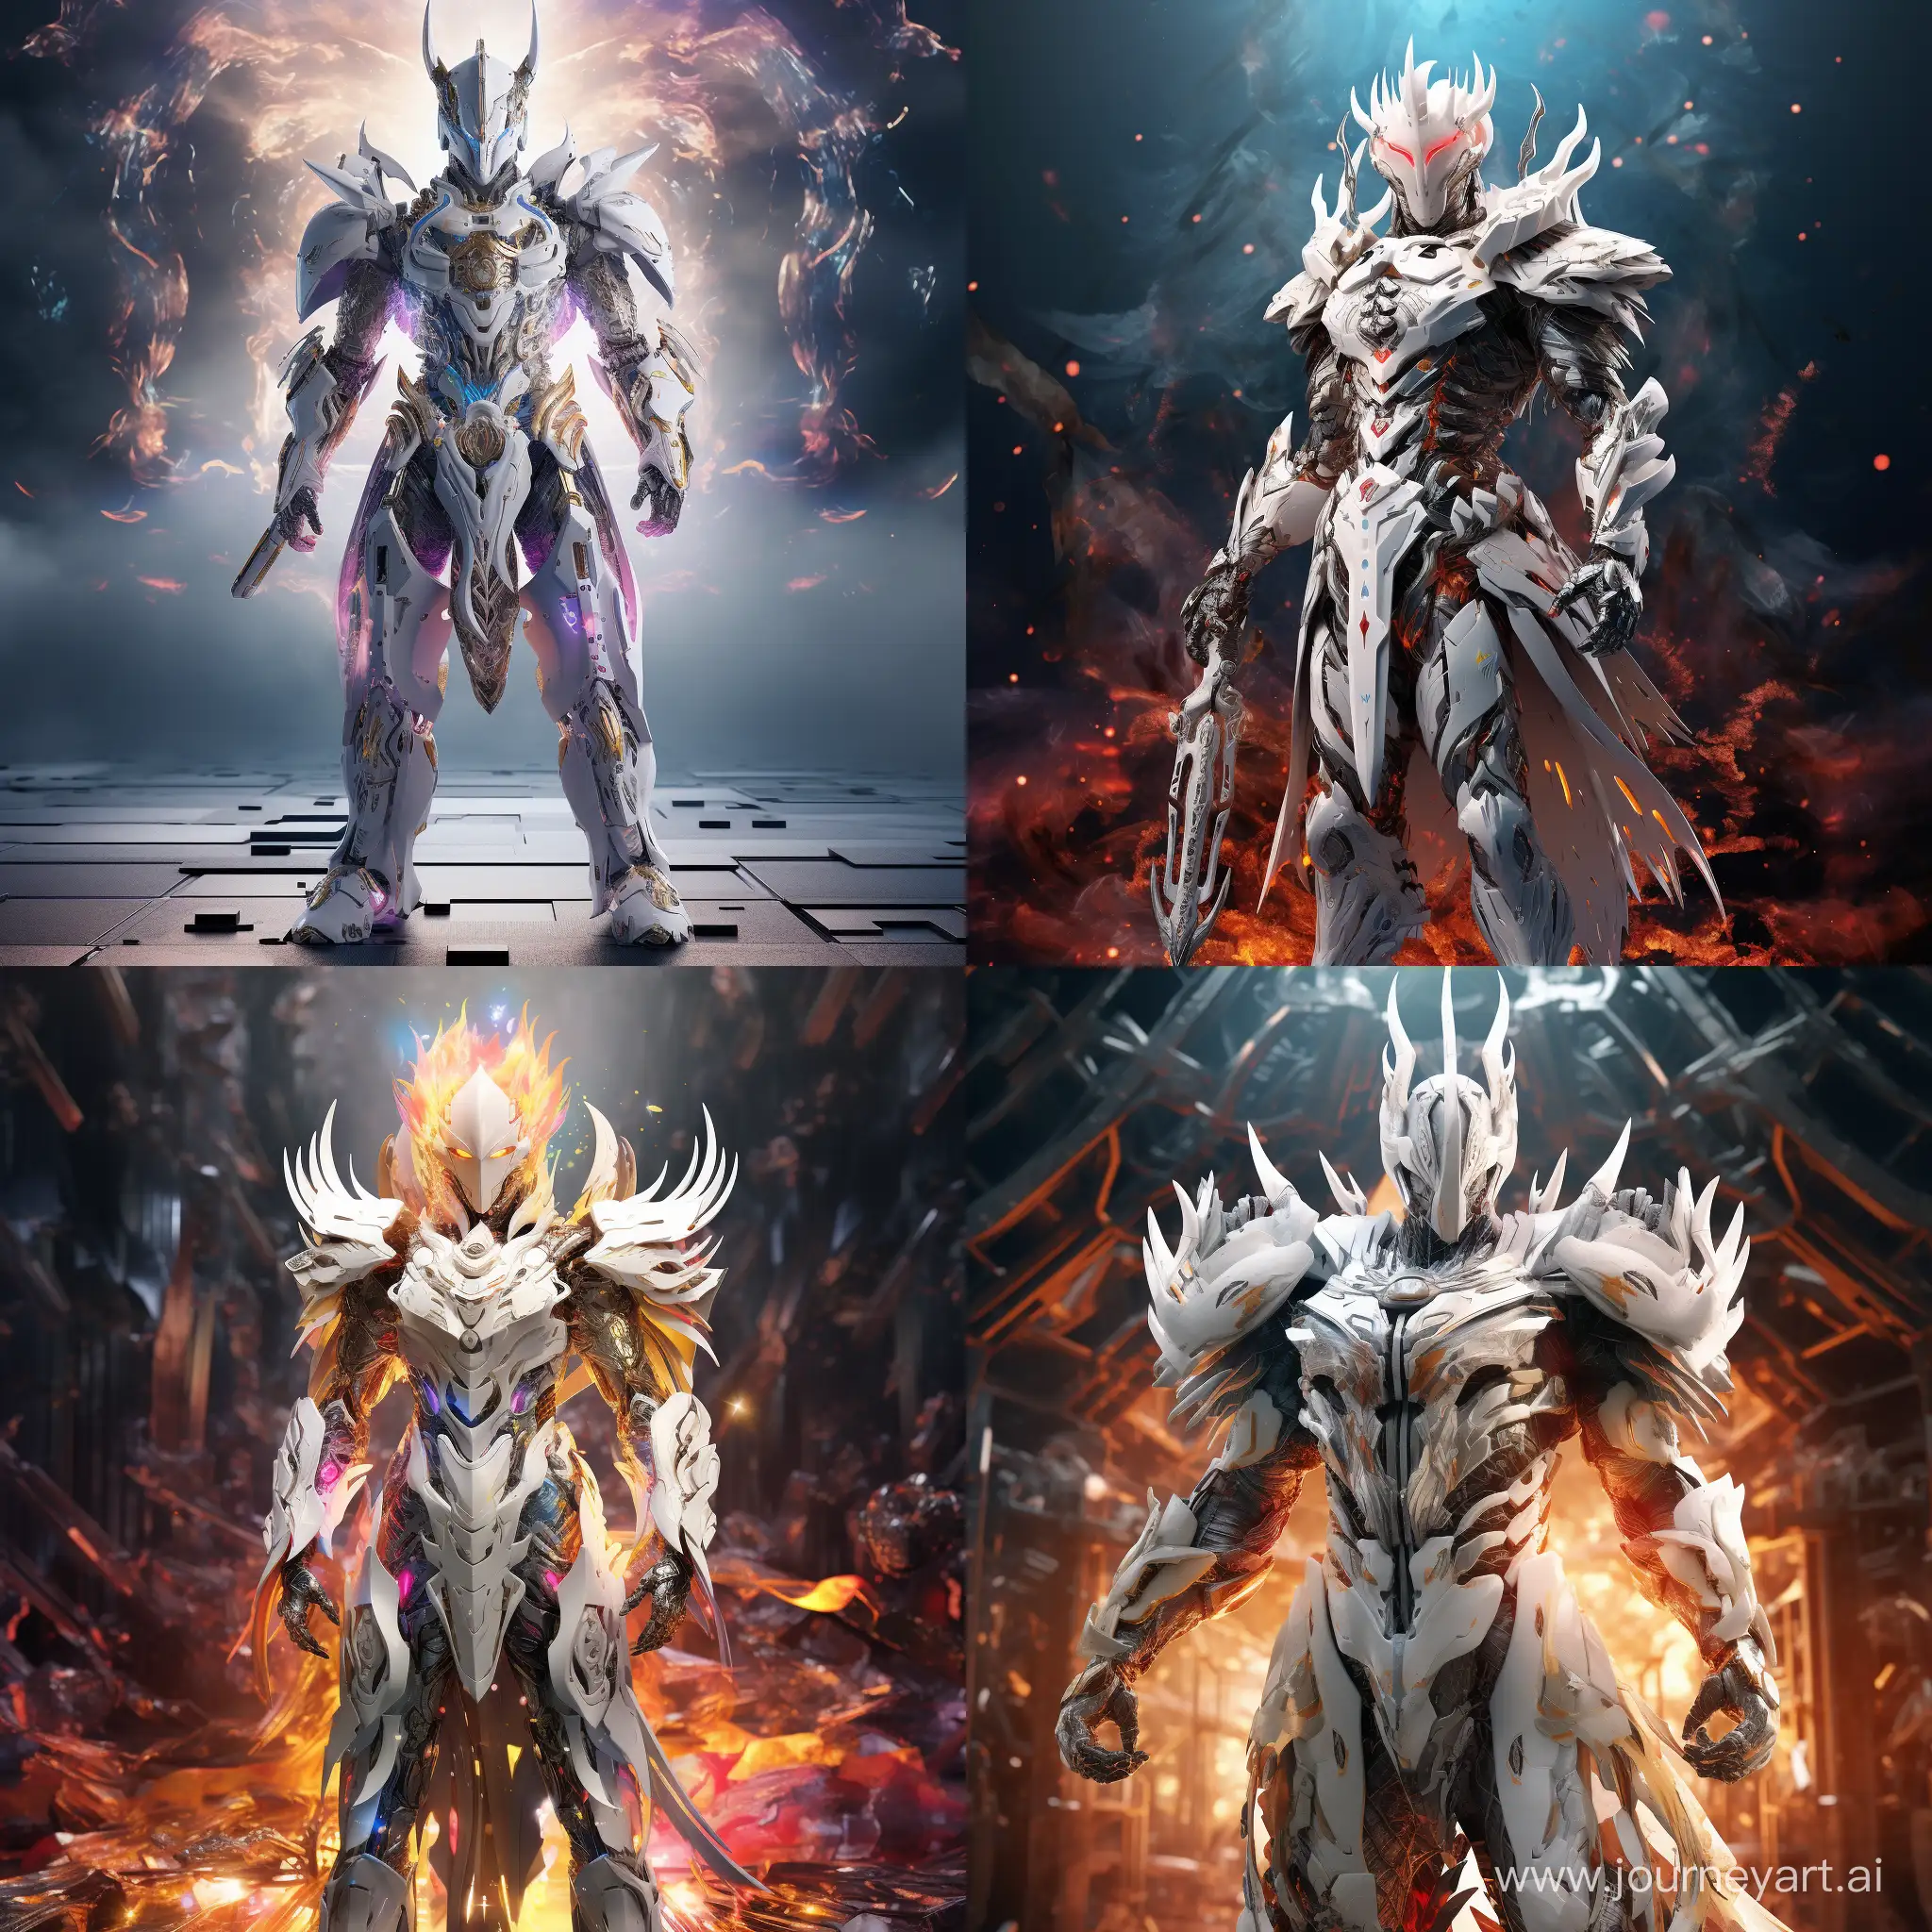 Colorful-Cyberpunk-White-Knight-in-Unconventional-Armor